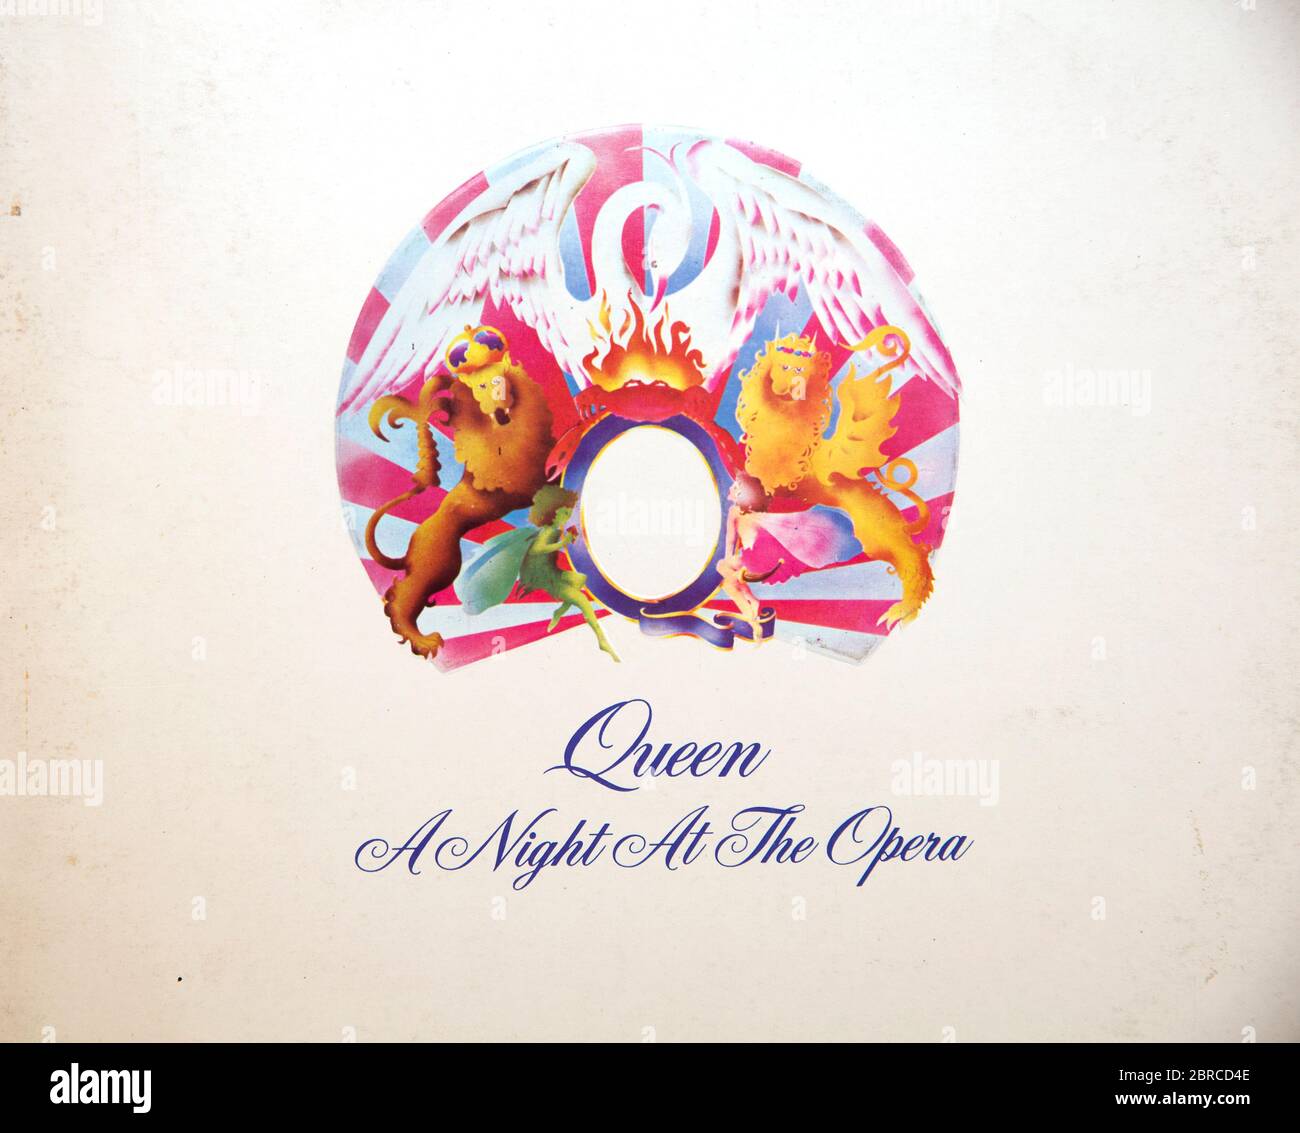 Cover of vinyl album A Night at the Opera by Queen Stock Photo